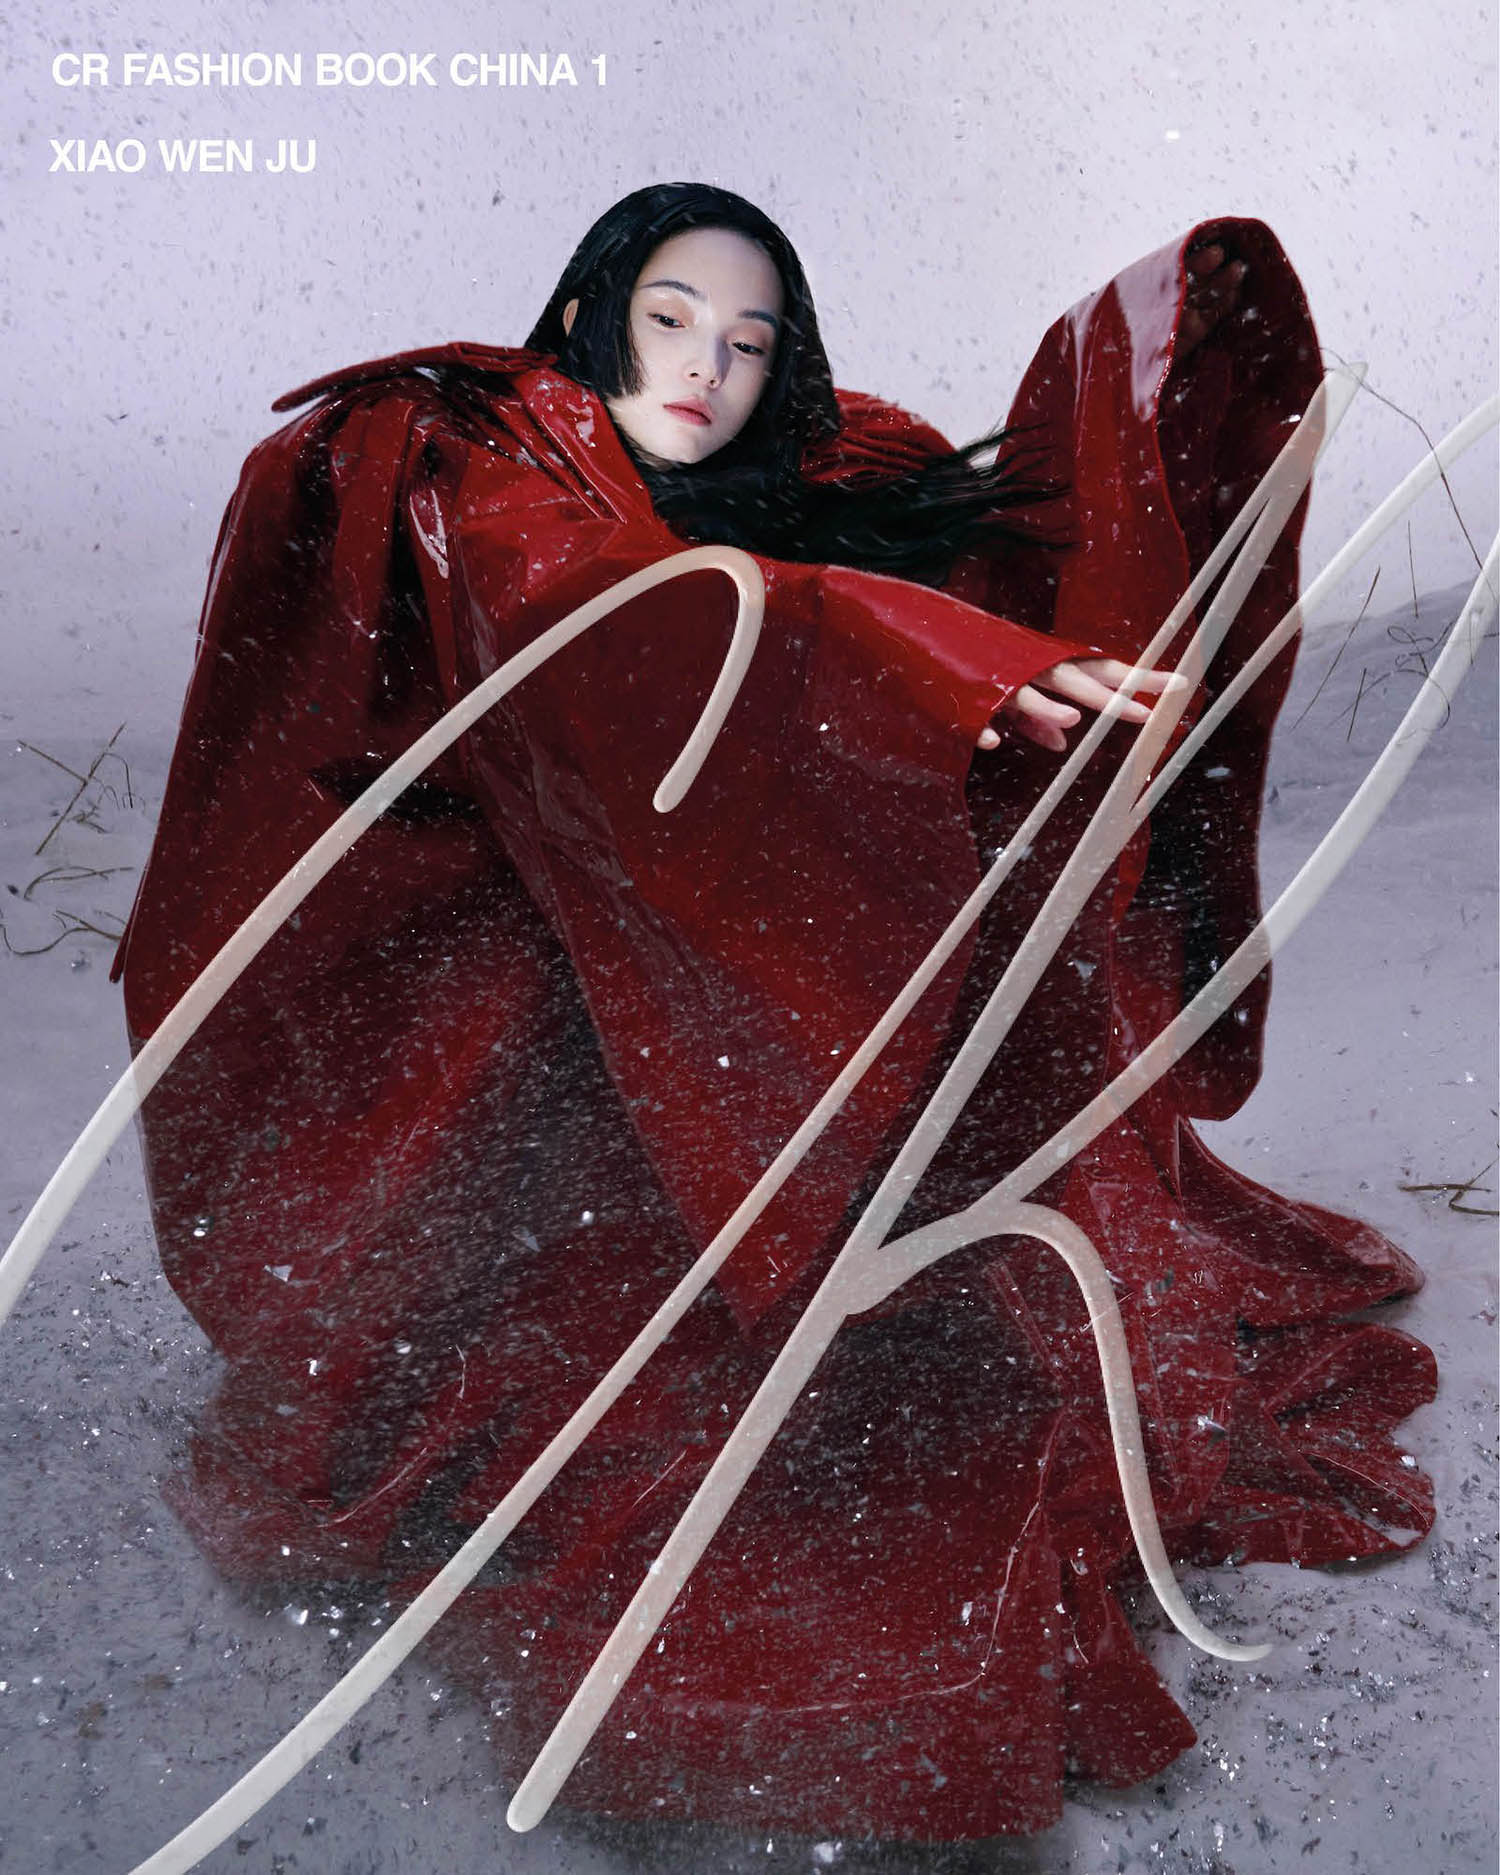 Xiao Wen Ju covers CR Fashion Book China Issue 01 by Fan XinXiao Wen Ju covers CR Fashion Book China Issue 01 by Fan Xin